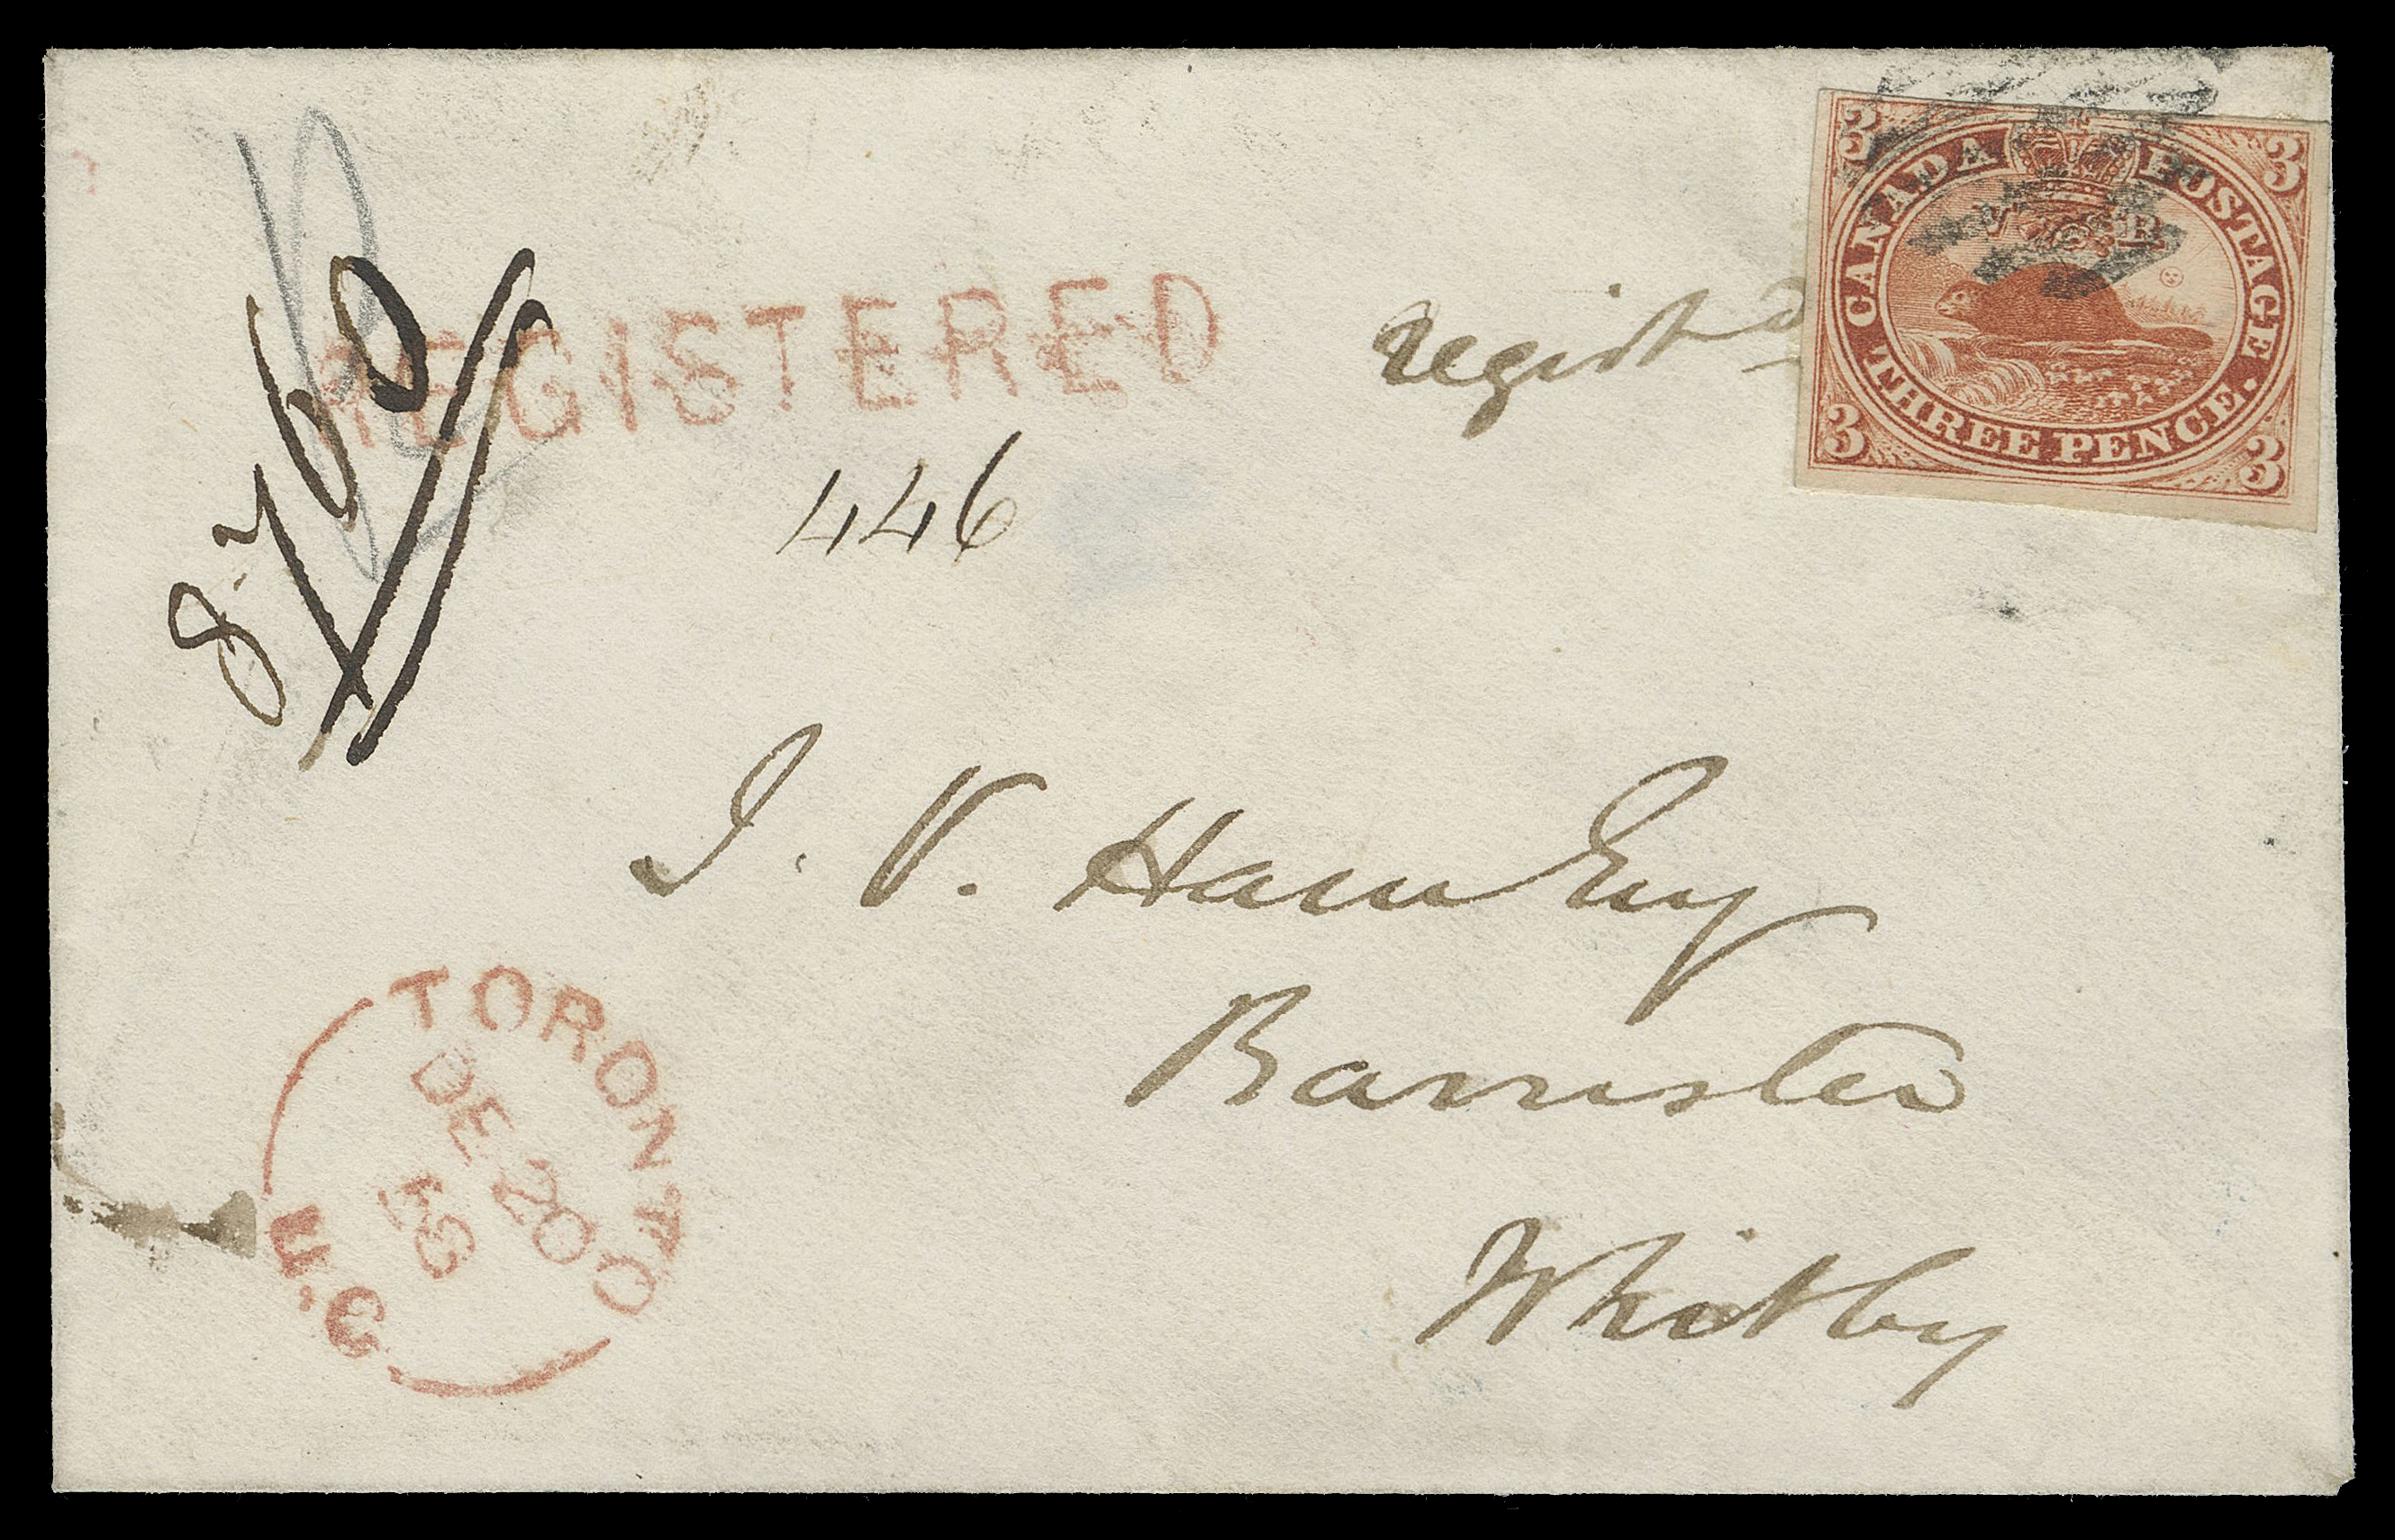 THREE PENCE AND FIVE CENTS  1858 (December 20) Small white envelope in immaculate fresh condition mailed registered to Whitby, bearing a 3p red on medium wove paper with fabulous colour, barely touching frame at top to large margins and tied by diamond grid, Toronto split ring dispatch and straightline REGISTERED handstamp in red. An appealing 3 pence domestic letter rate, the 1 penny registration fee paid in cash as customary, VF (Unitrade 4)

Provenance: The "Harbour" Collection of Pence, Firby Auctions, May 1996; Lot 24